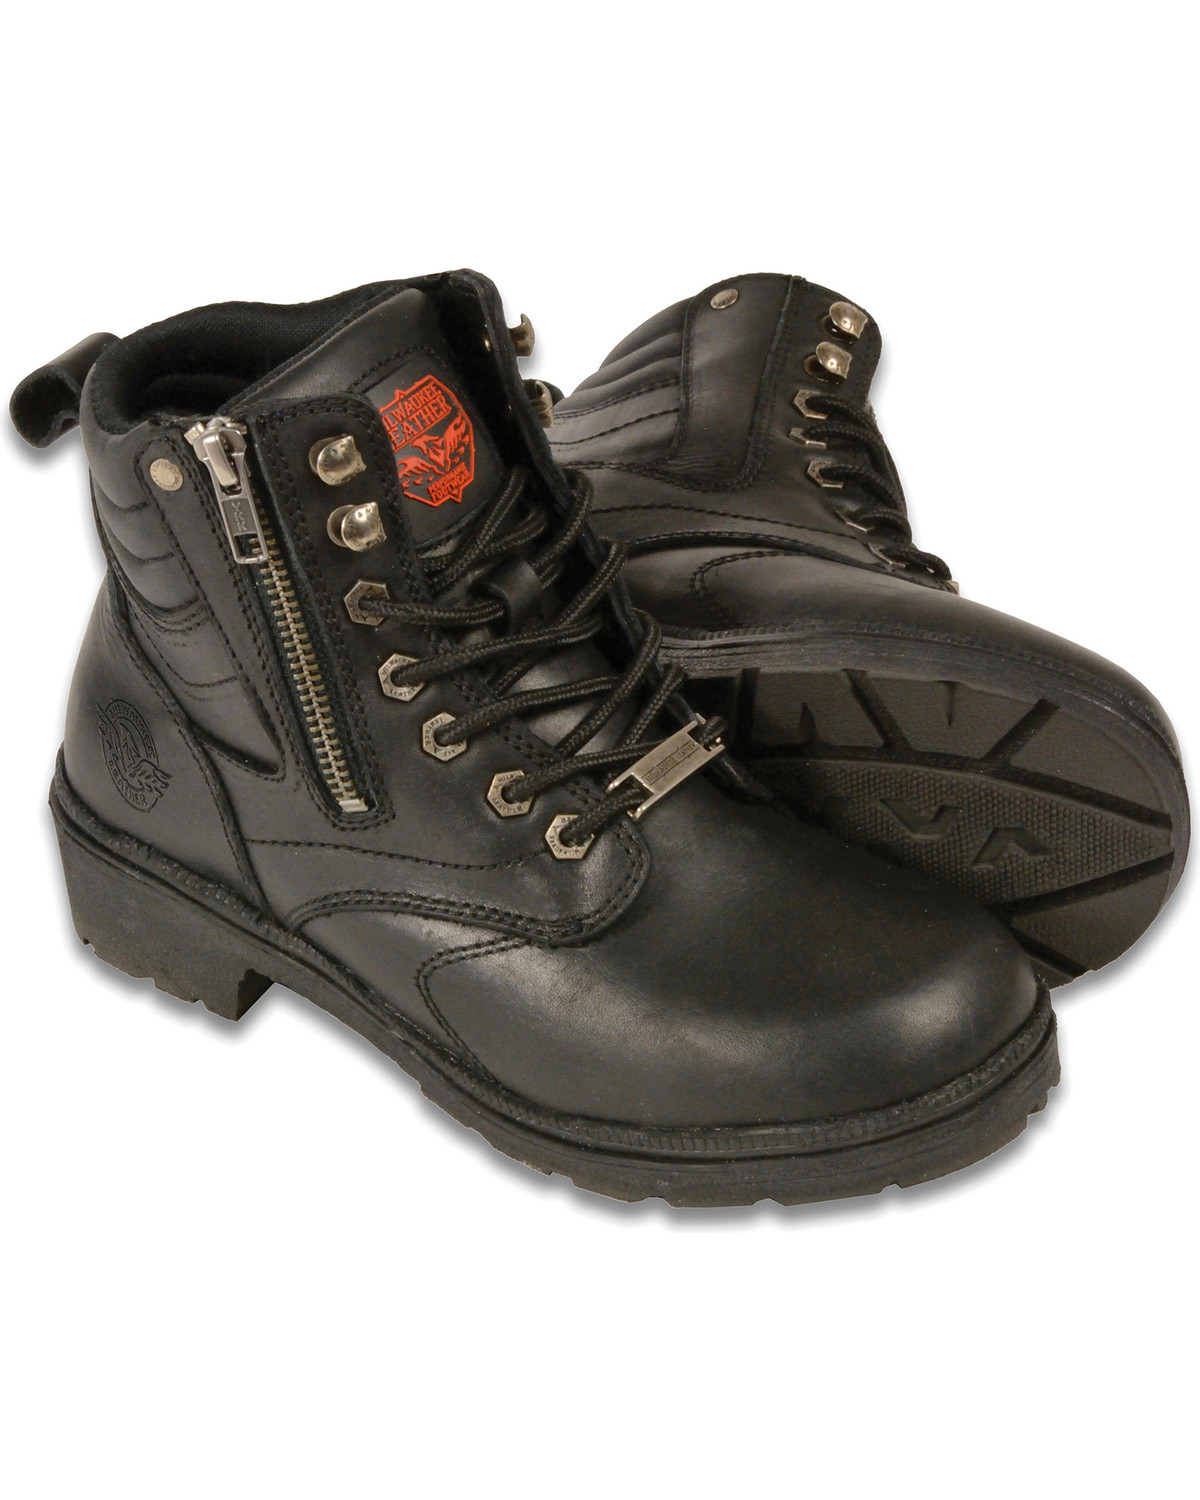 milwaukee motorcycle boots womens